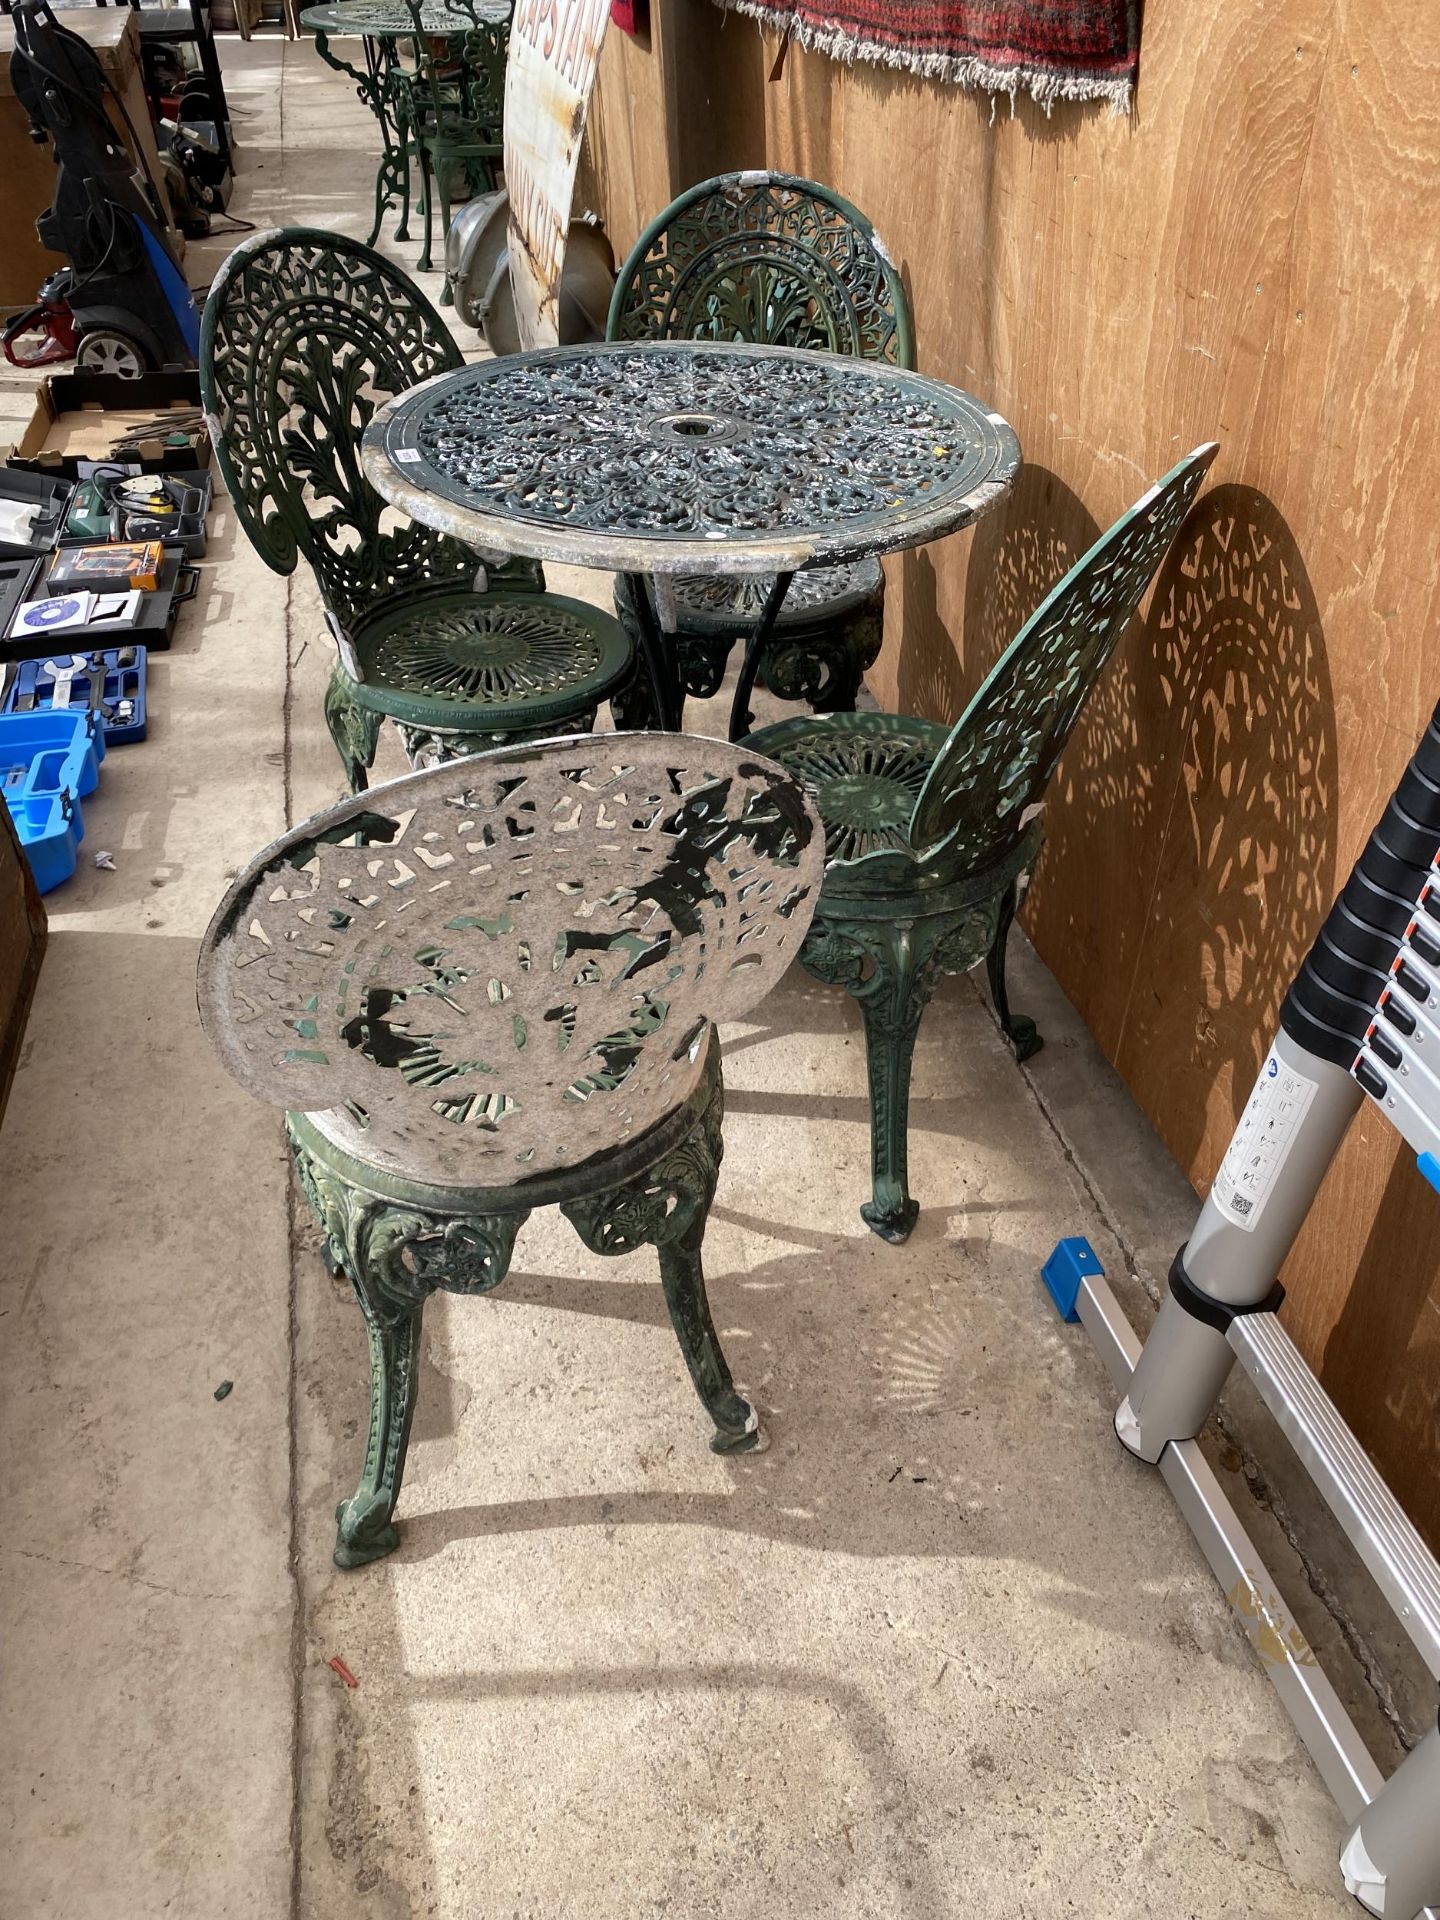 A VINTAGE CAST ALLOY BISTRO SET COMPRISING OF A ROUND TABLE AND FOUR CHAIRS - Image 4 of 4